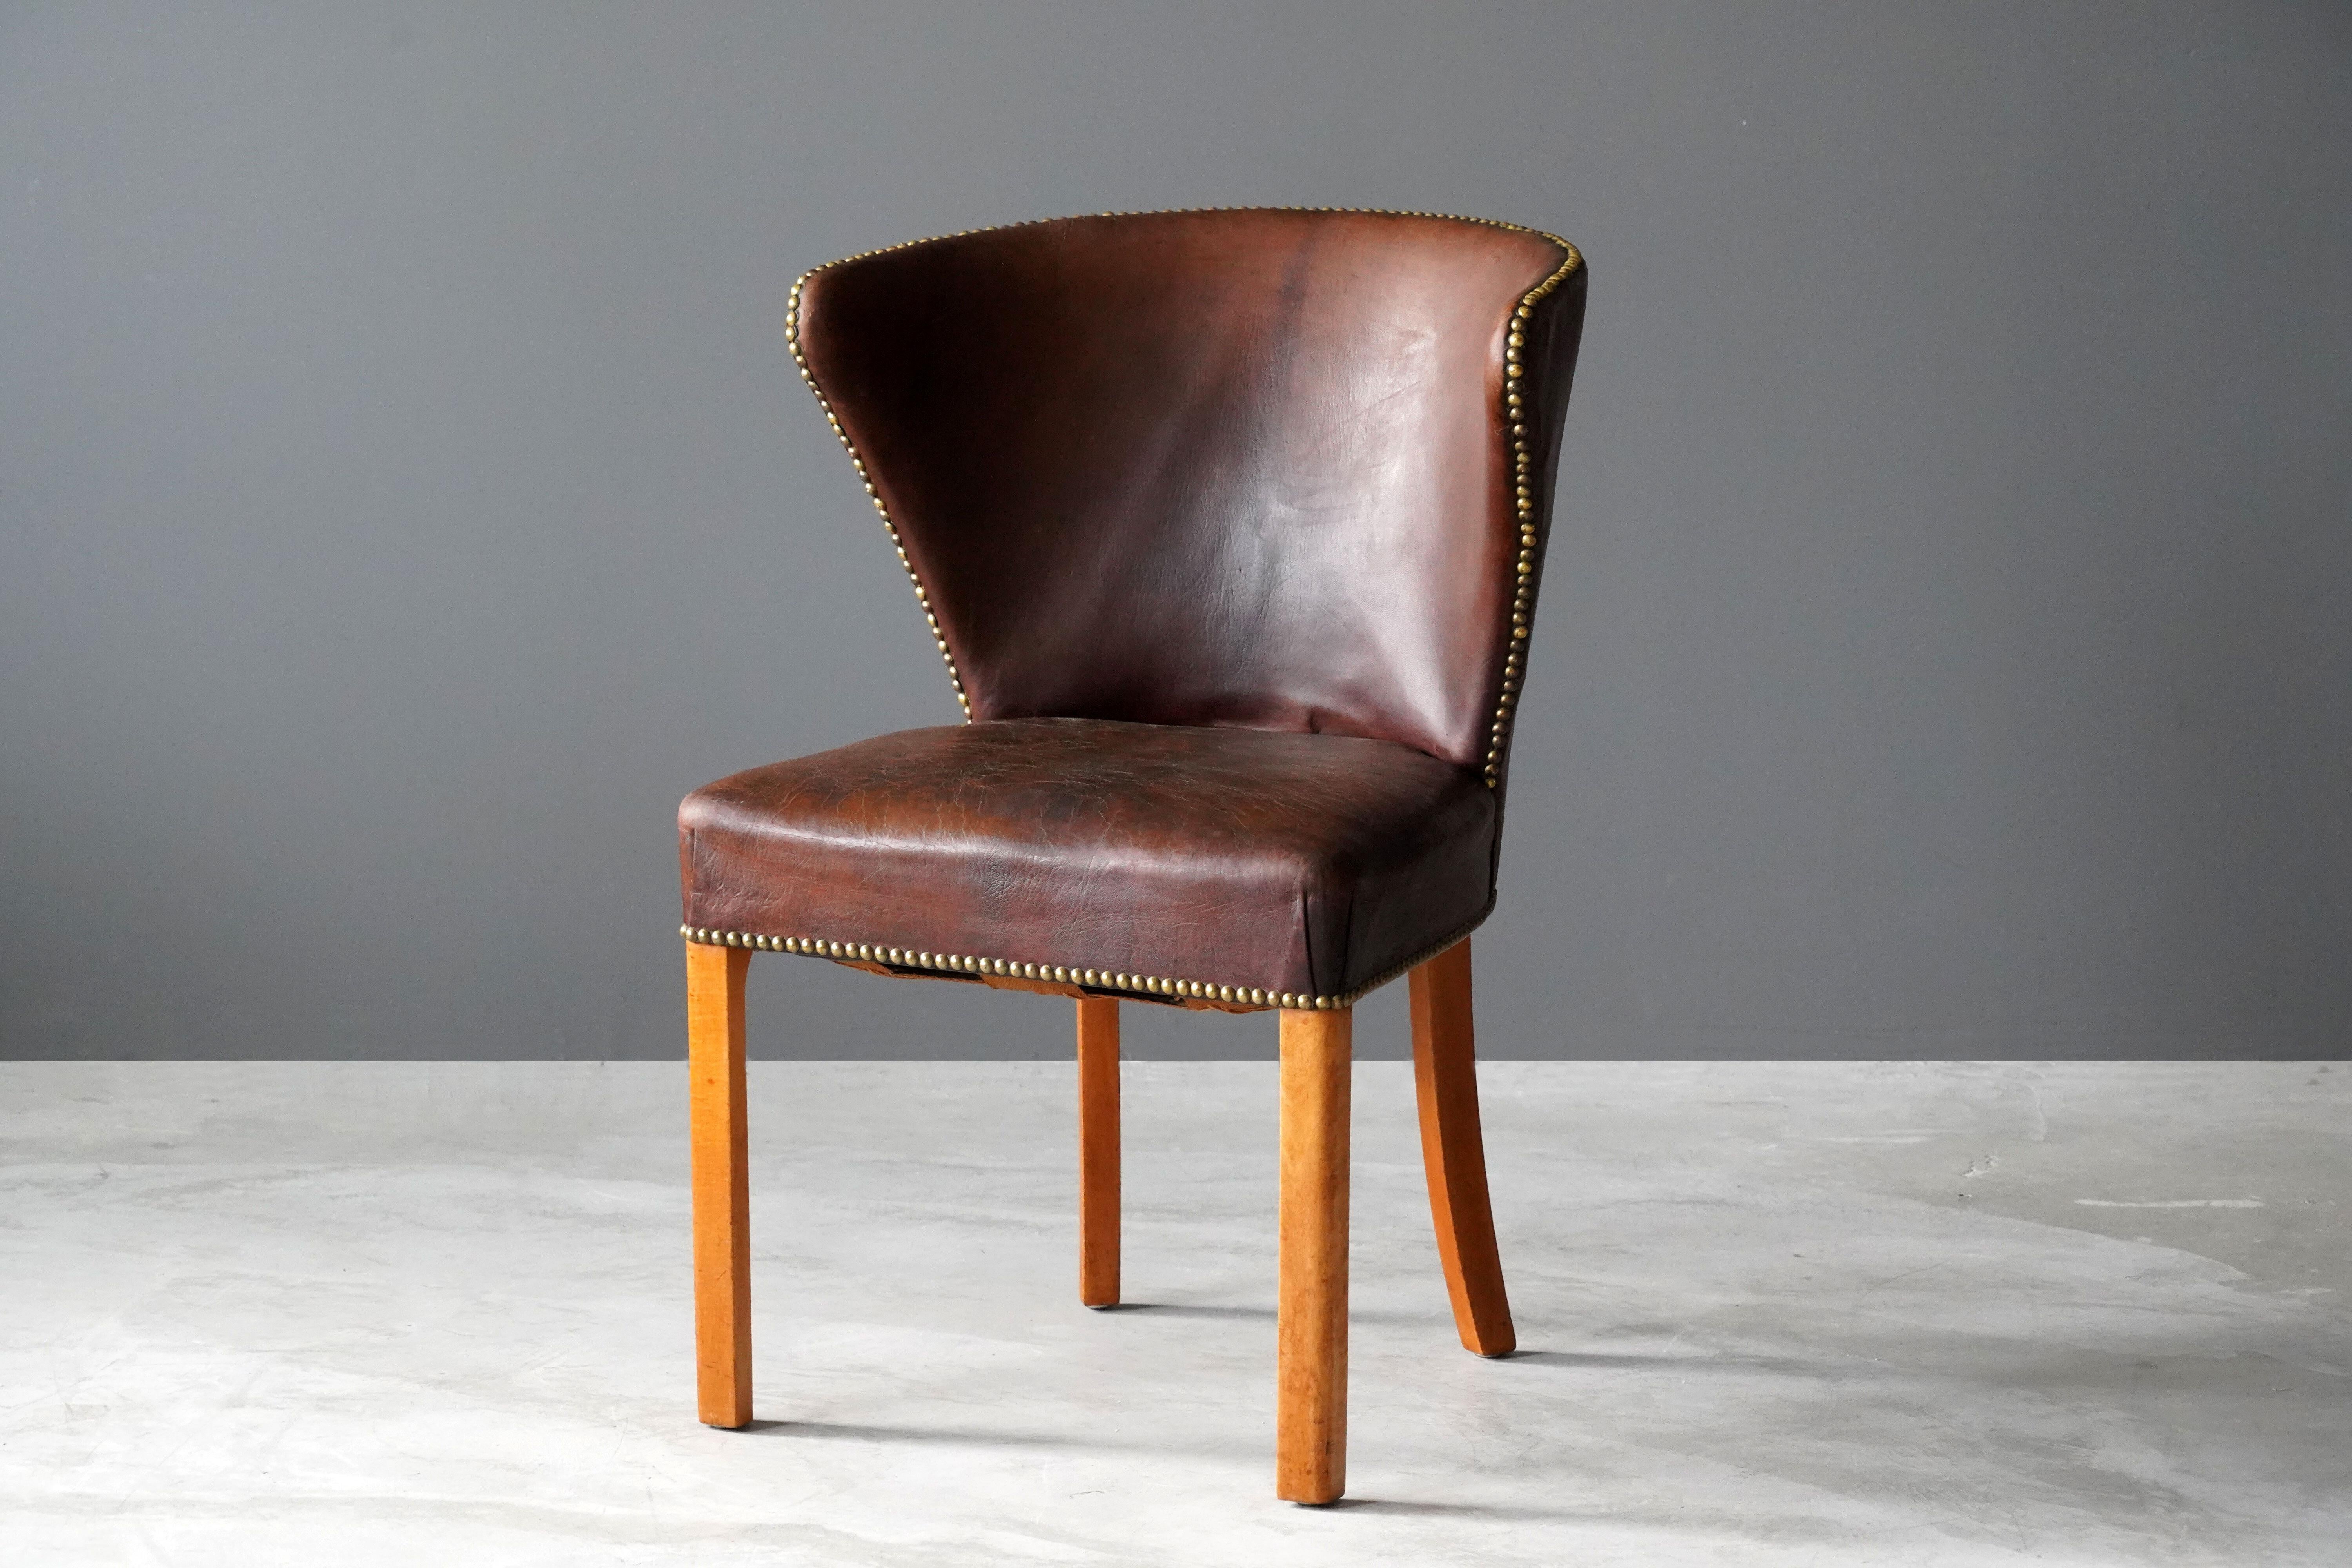 An early all original side chair. Designed and produced by Fritz Hansen. In original leather and brass nails. 

Other designers of the period include Kaare Klint, Frits Henningsen, Ole Wanscher, and Arne Jacobsen.